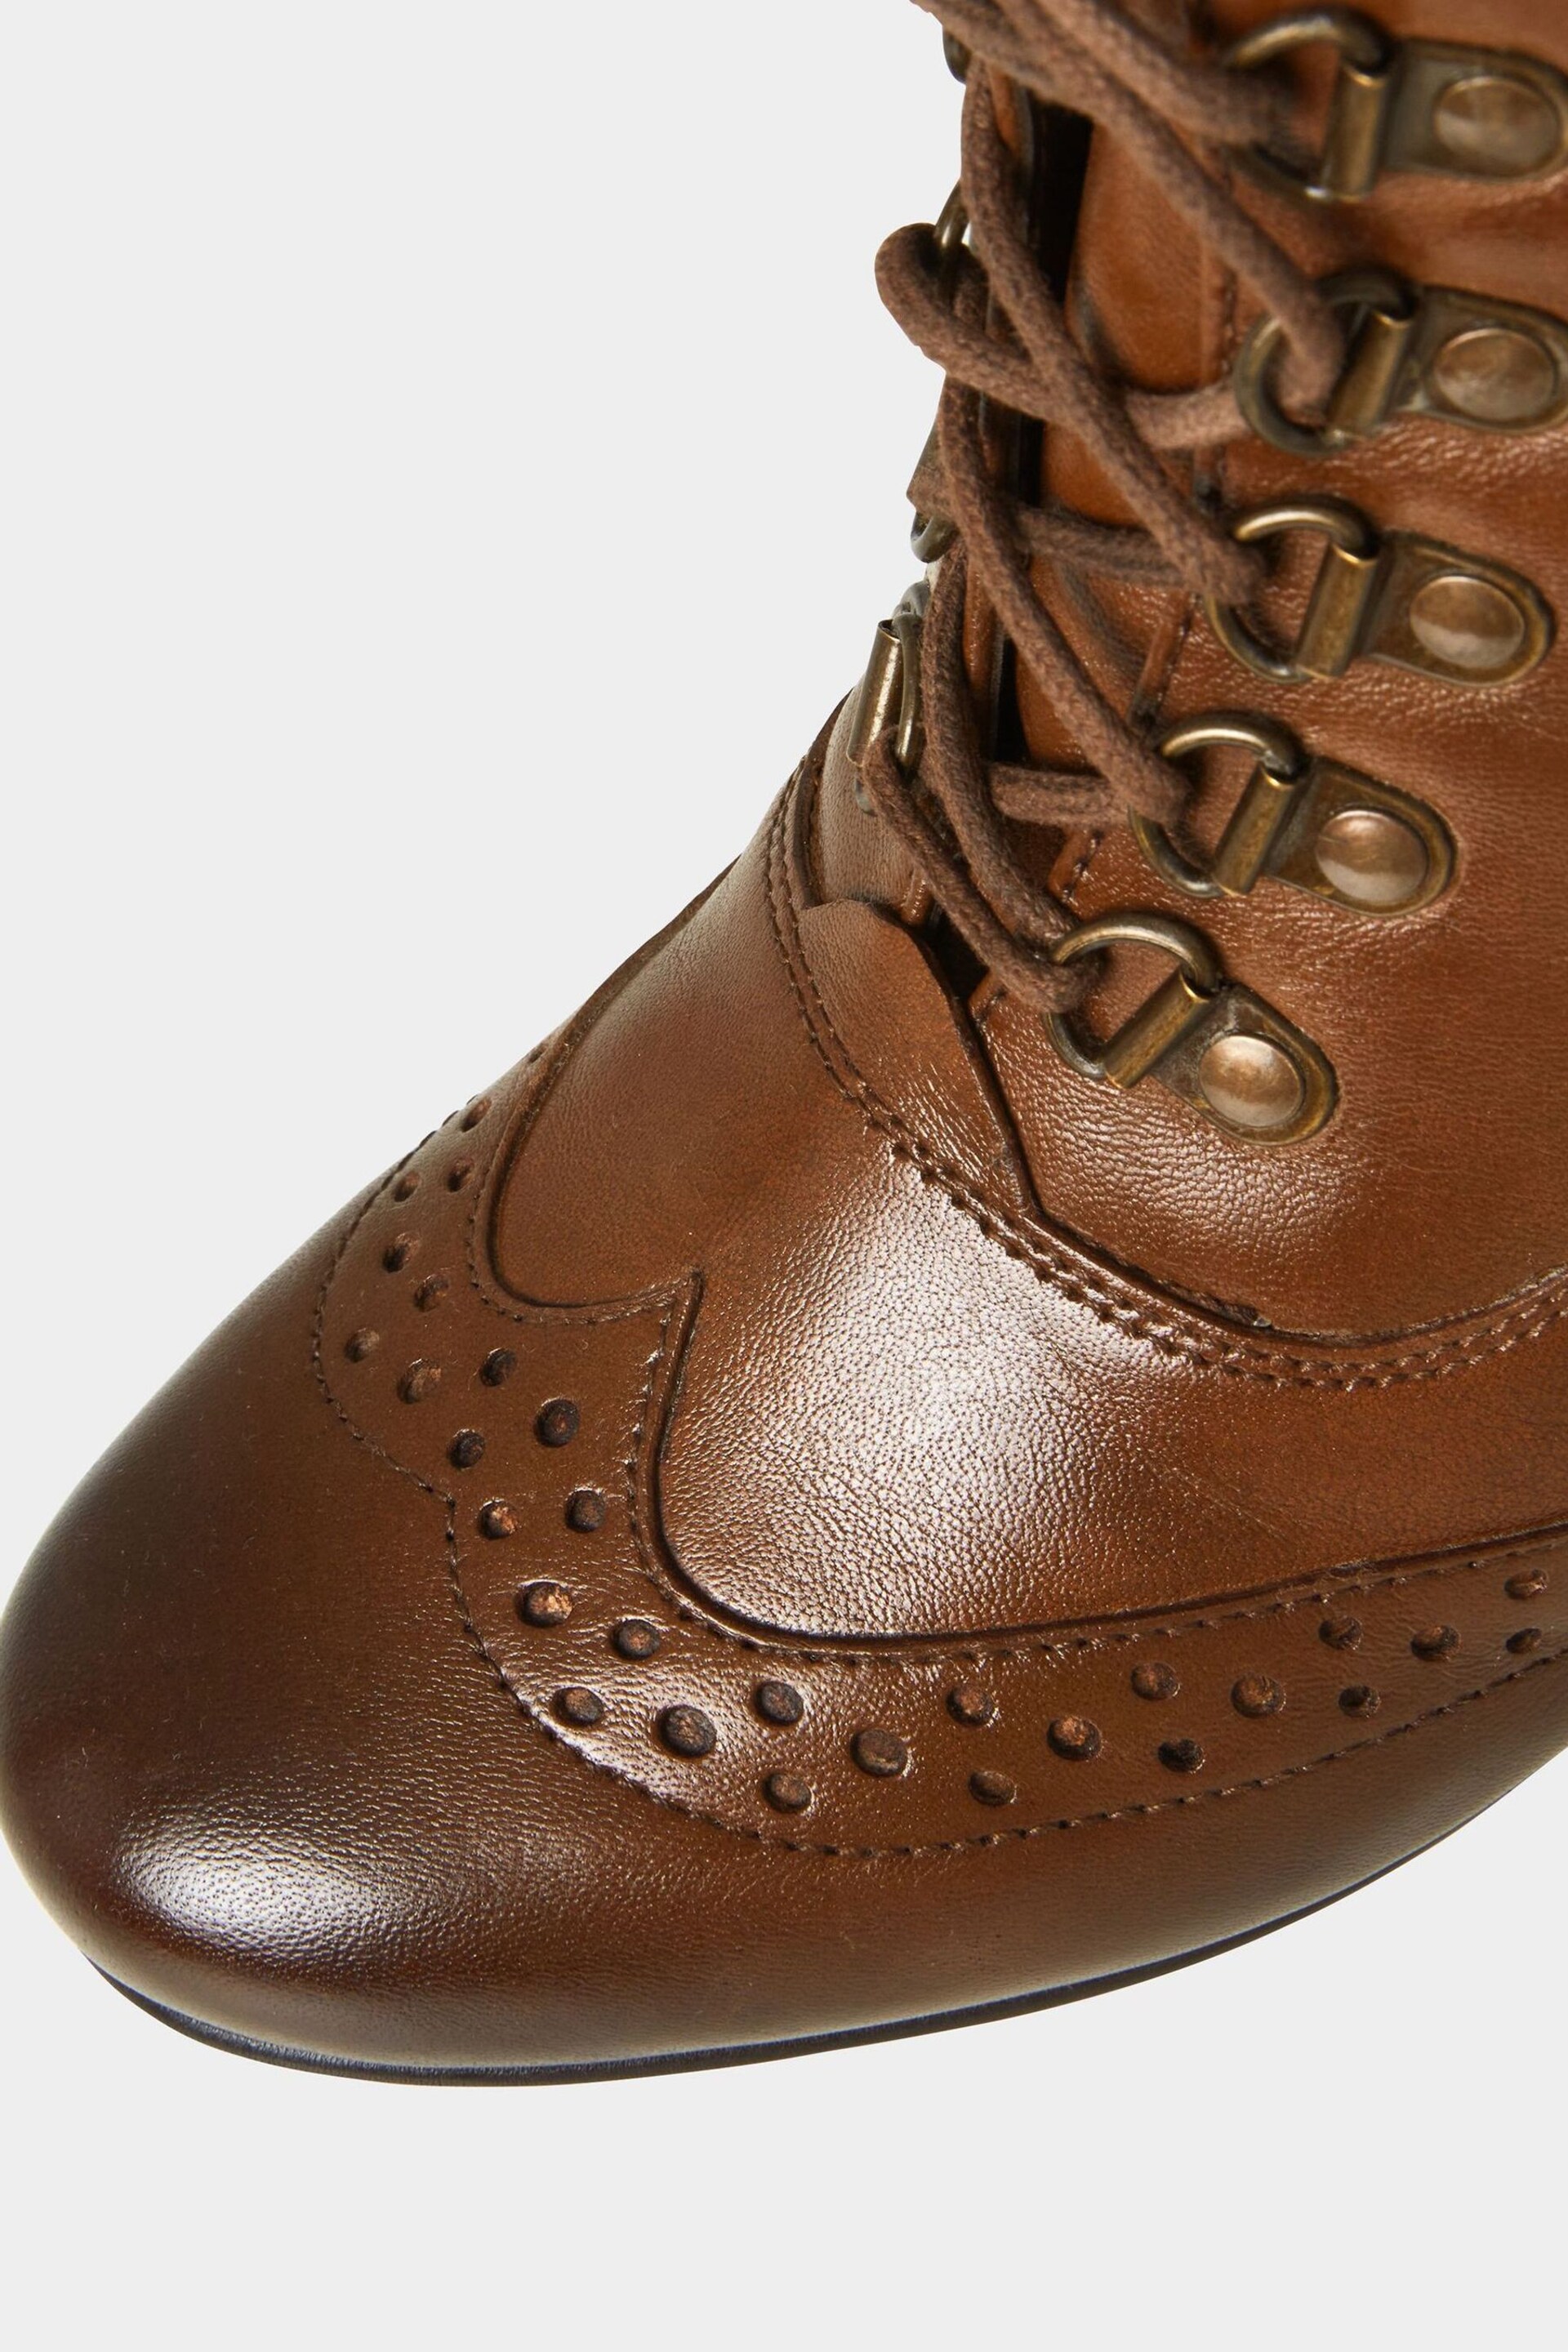 Joe Browns Brown Fenchurch Leather Boots - Image 4 of 4